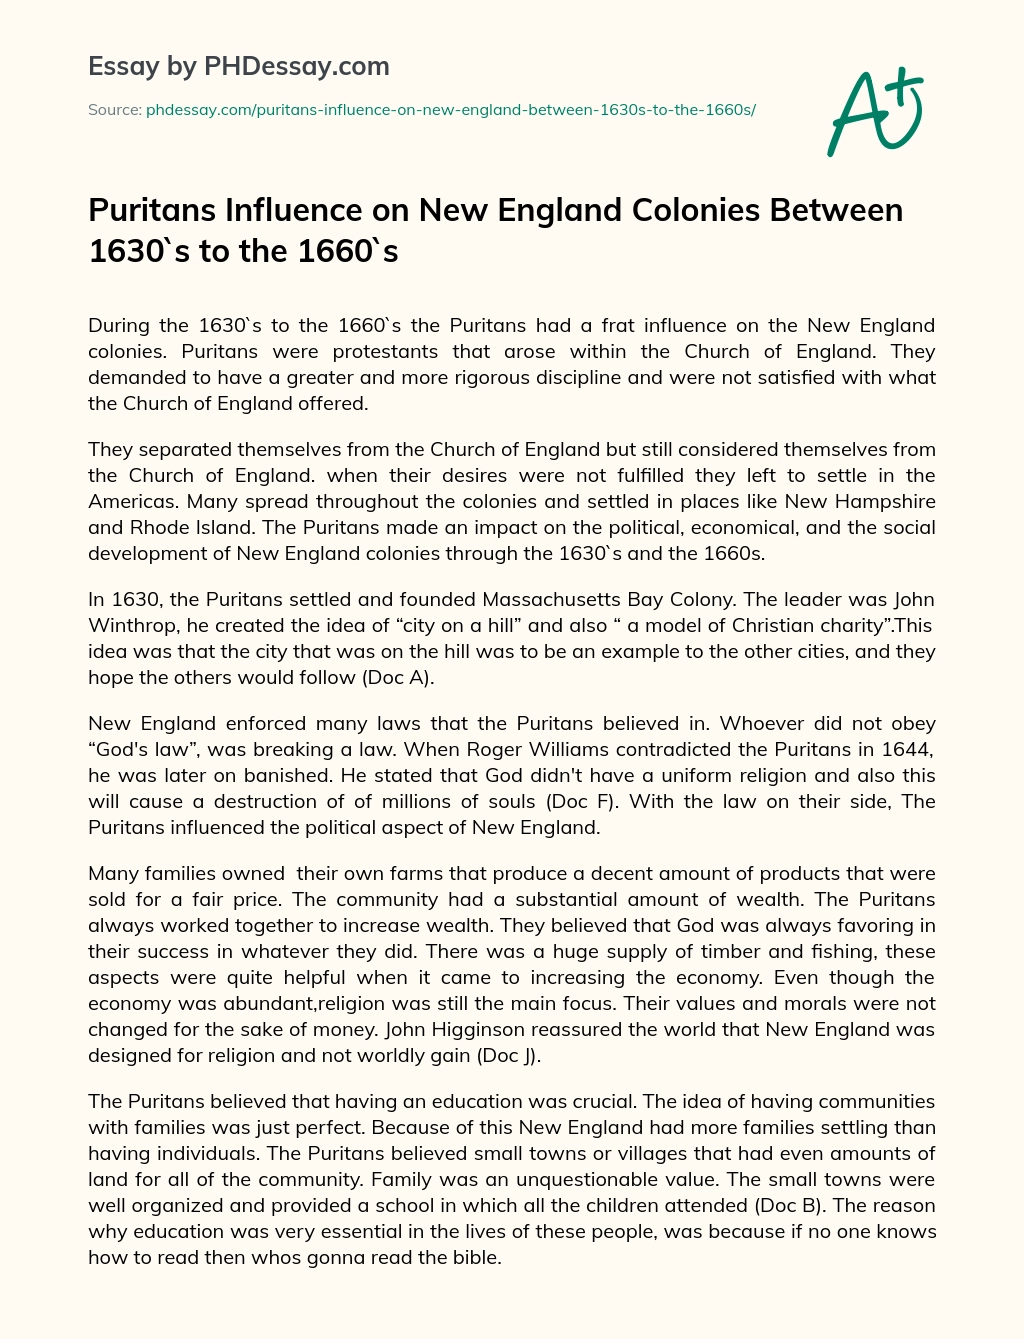 Puritans Influence on New England Colonies Between 1630`s to the 1660`s essay